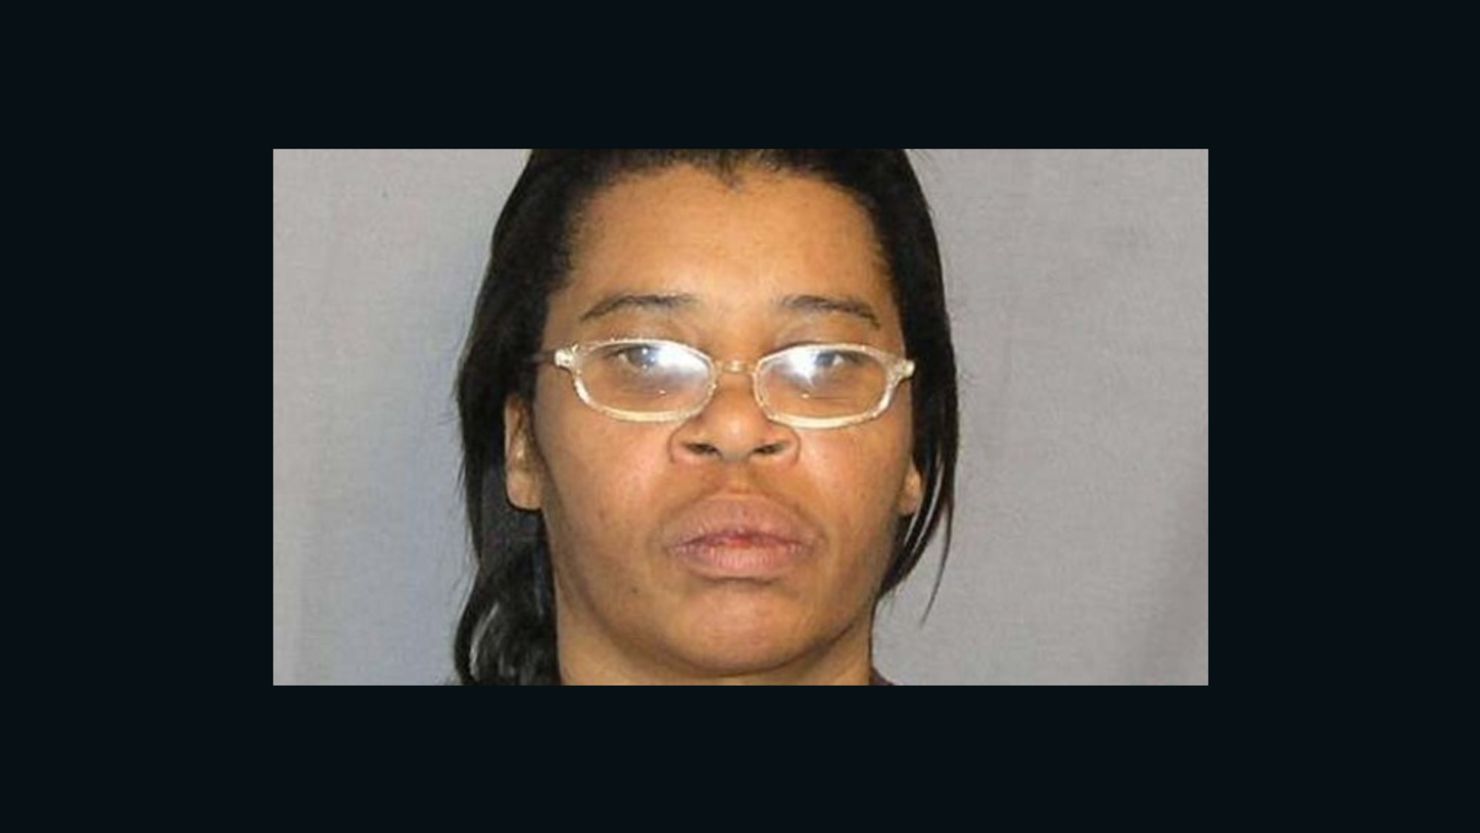 Ann Pettway pleaded guilty in February to abducting a baby in 1987.